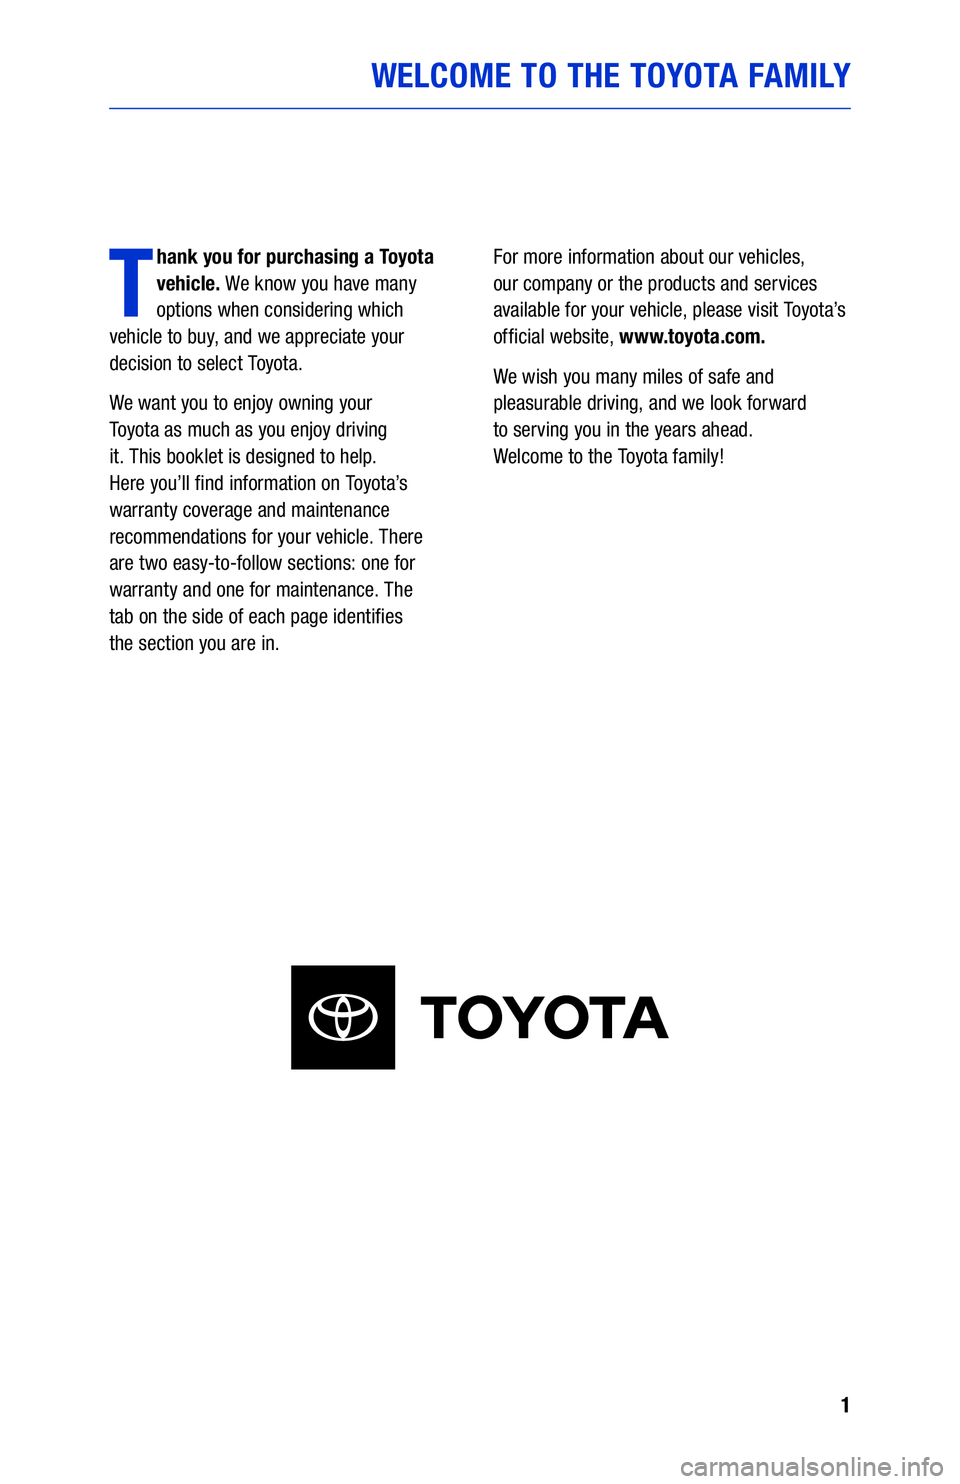 TOYOTA COROLLA HYBRID 2021  Warranties & Maintenance Guides (in English) 1
WELCOME TO THE TOYOTA FAMILY
T
hank you for purchasing a Toyota 
vehicle. We know you have many 
options when considering which  
vehicle to buy, and we appreciate your 
decision to select Toyota.
W